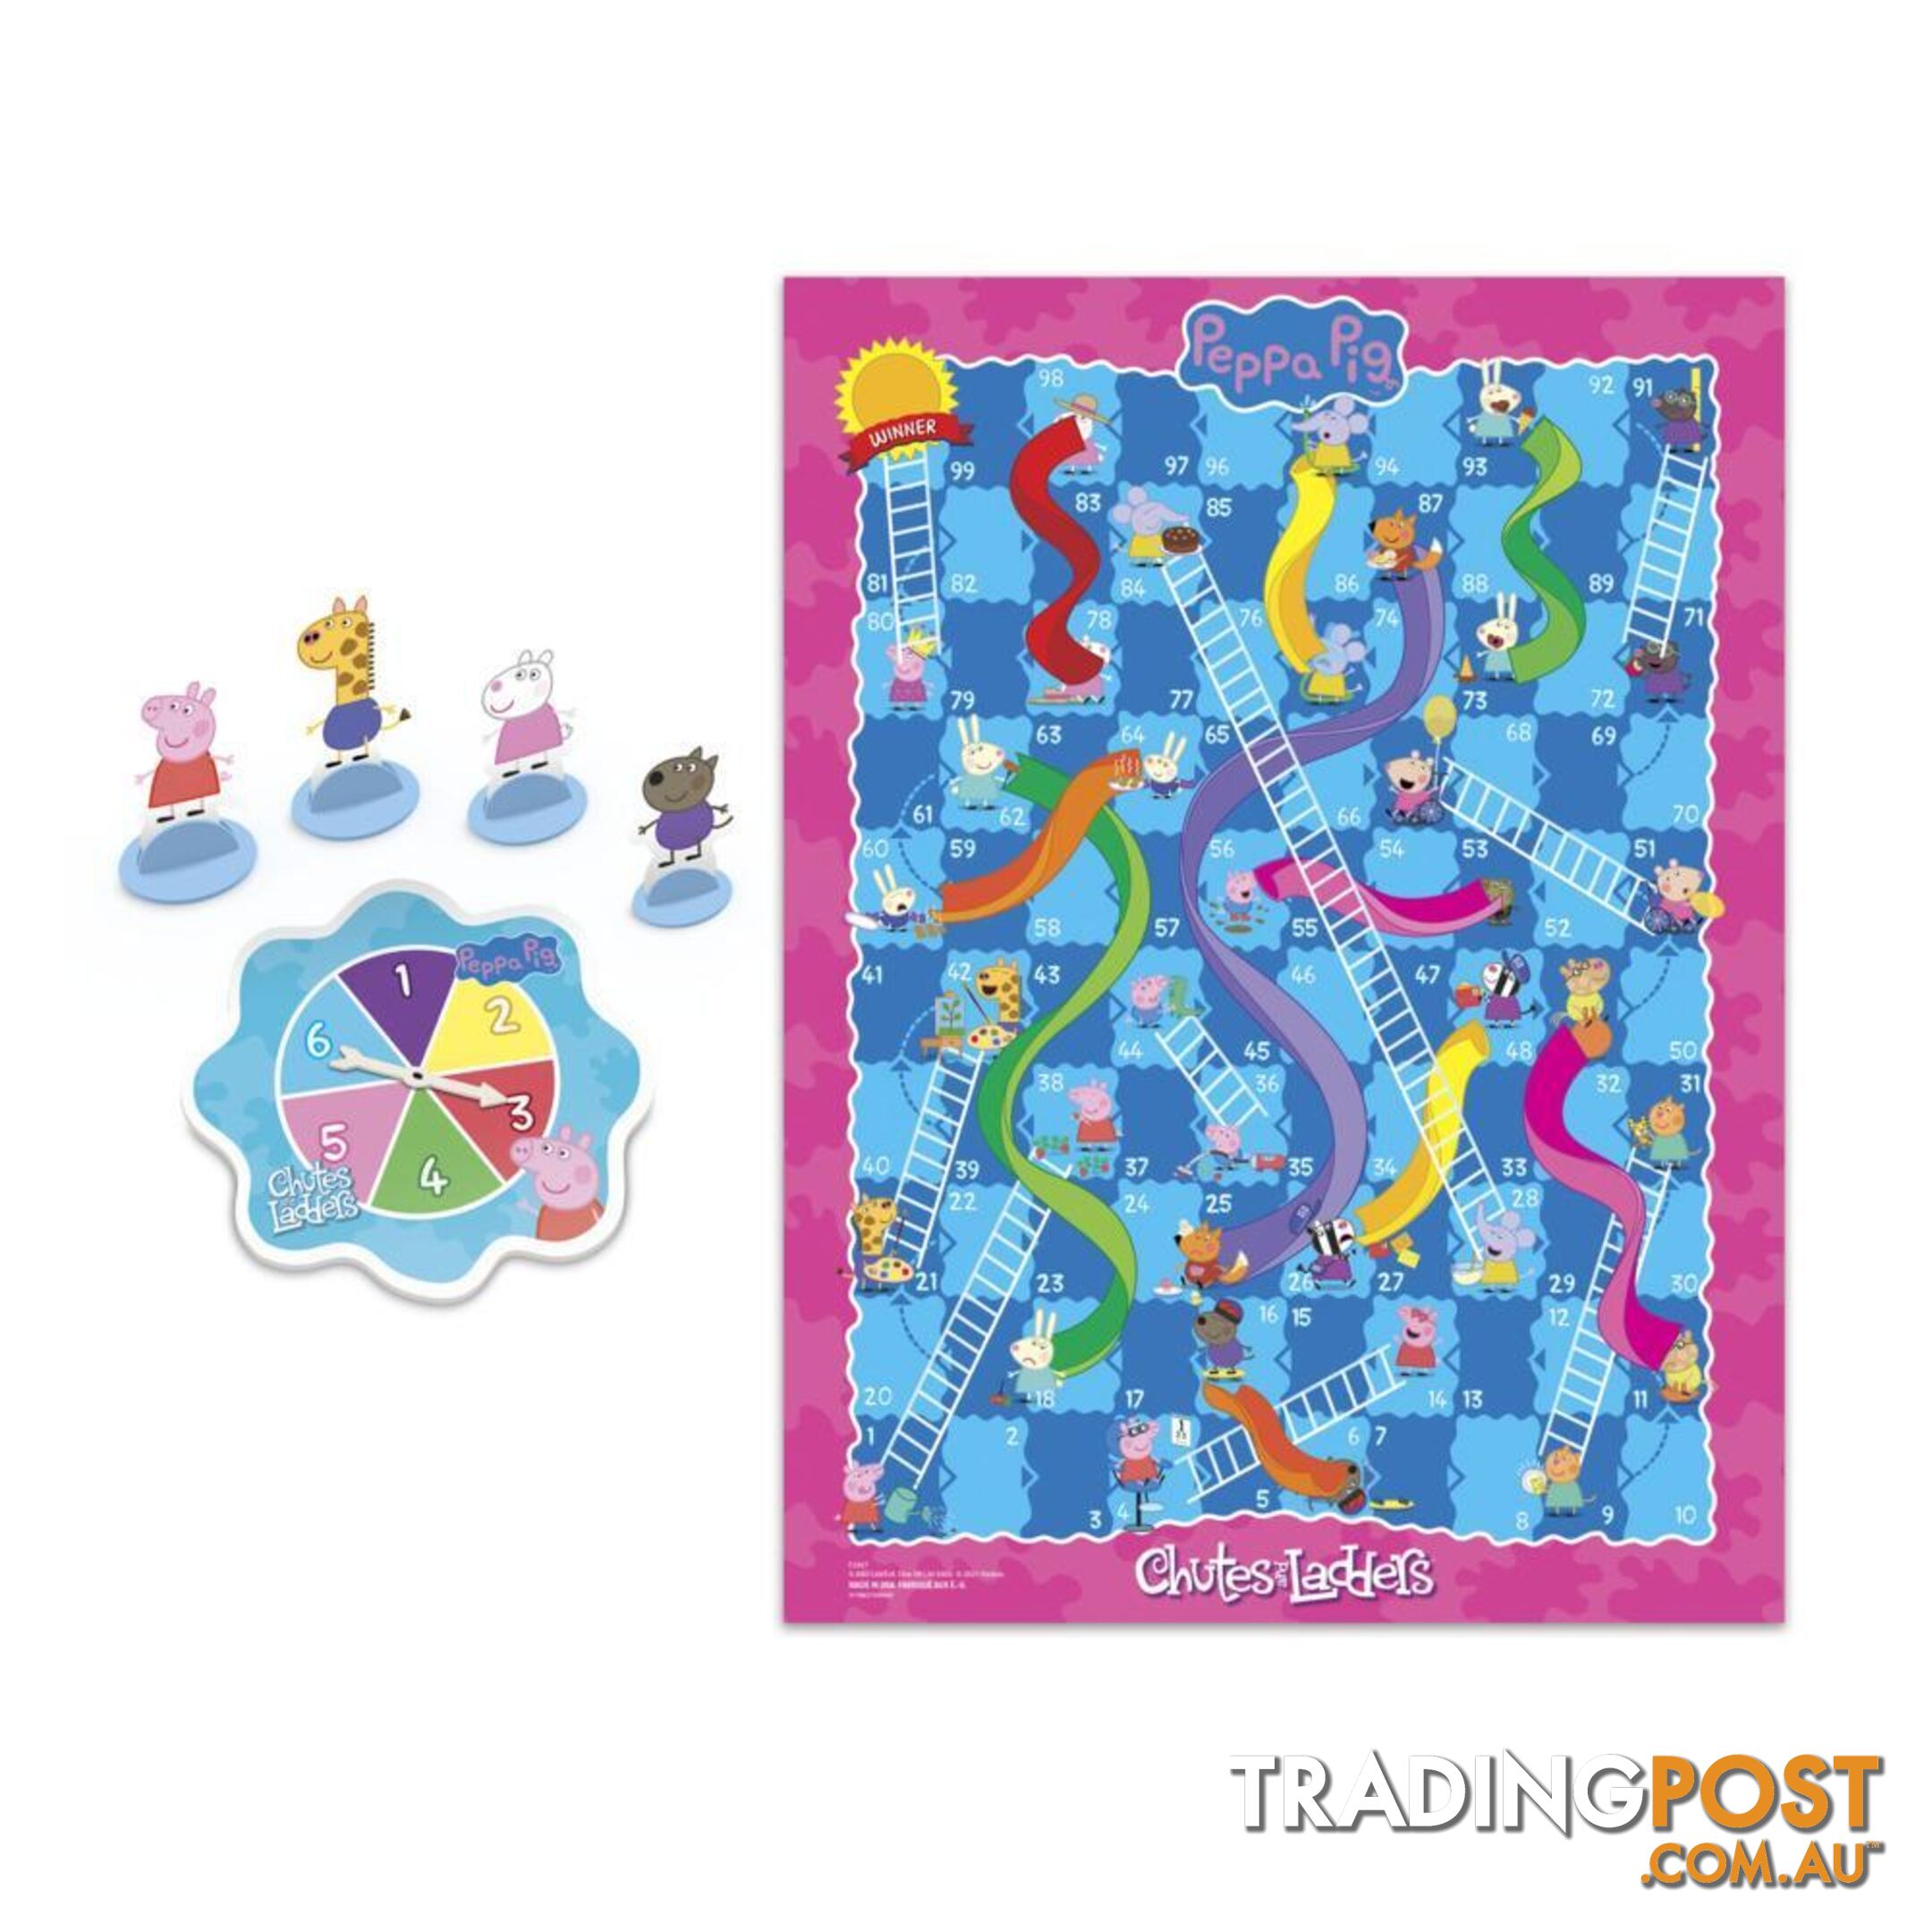 Peppa Pig - Chutes And Ladders - Peppa Pig - Edition Board Game For Kids Ages 3 And Up For 2-4 Players  Hasbro F2927 - 5060953138347